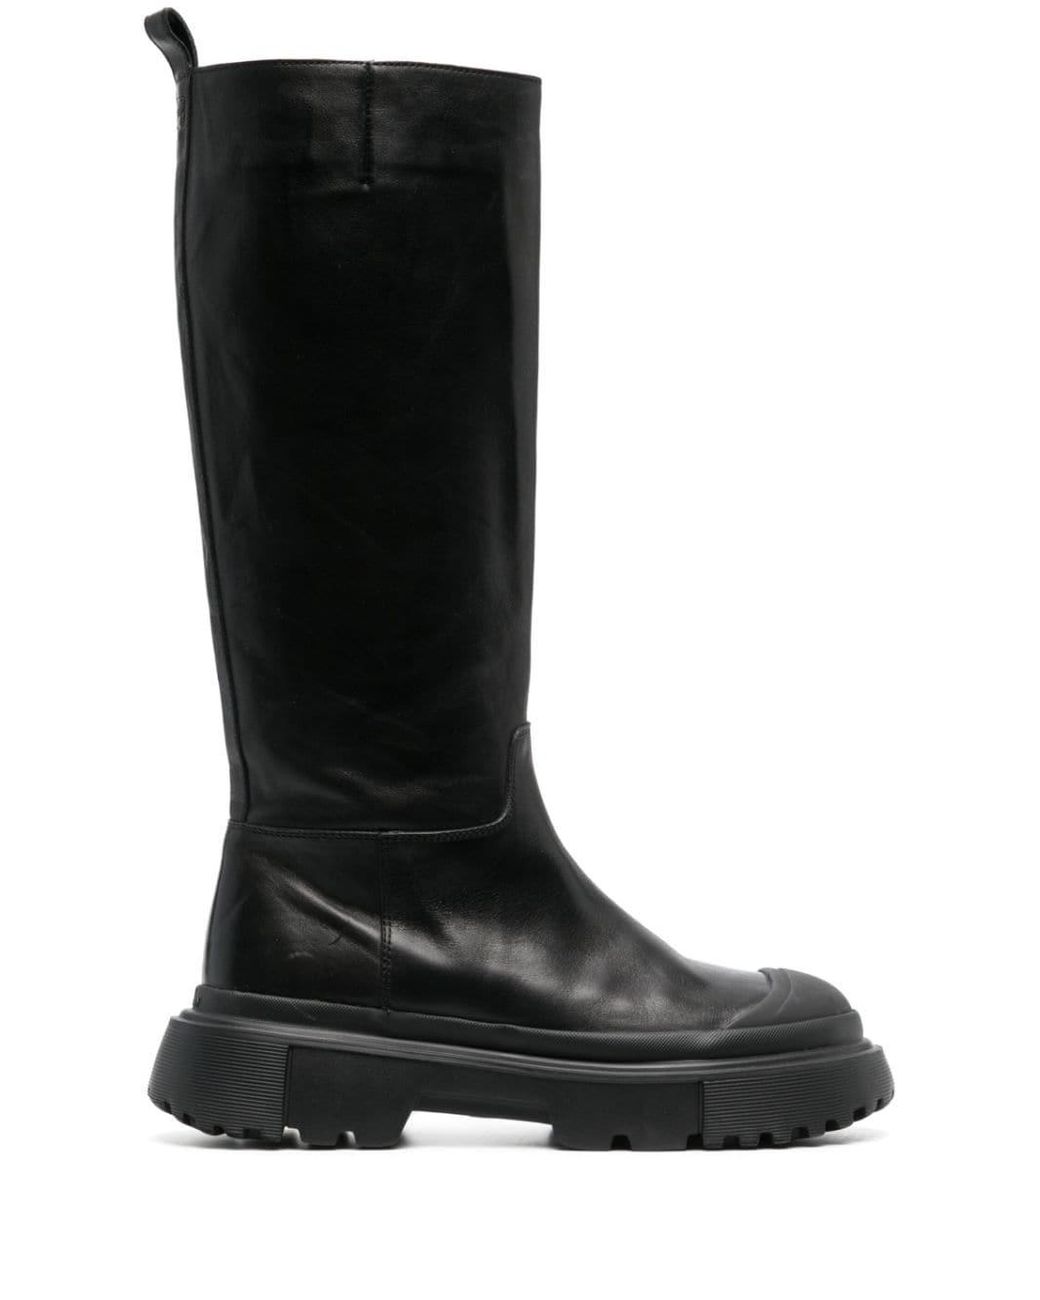 Hogan Stivale Leather Boots in Black | Lyst